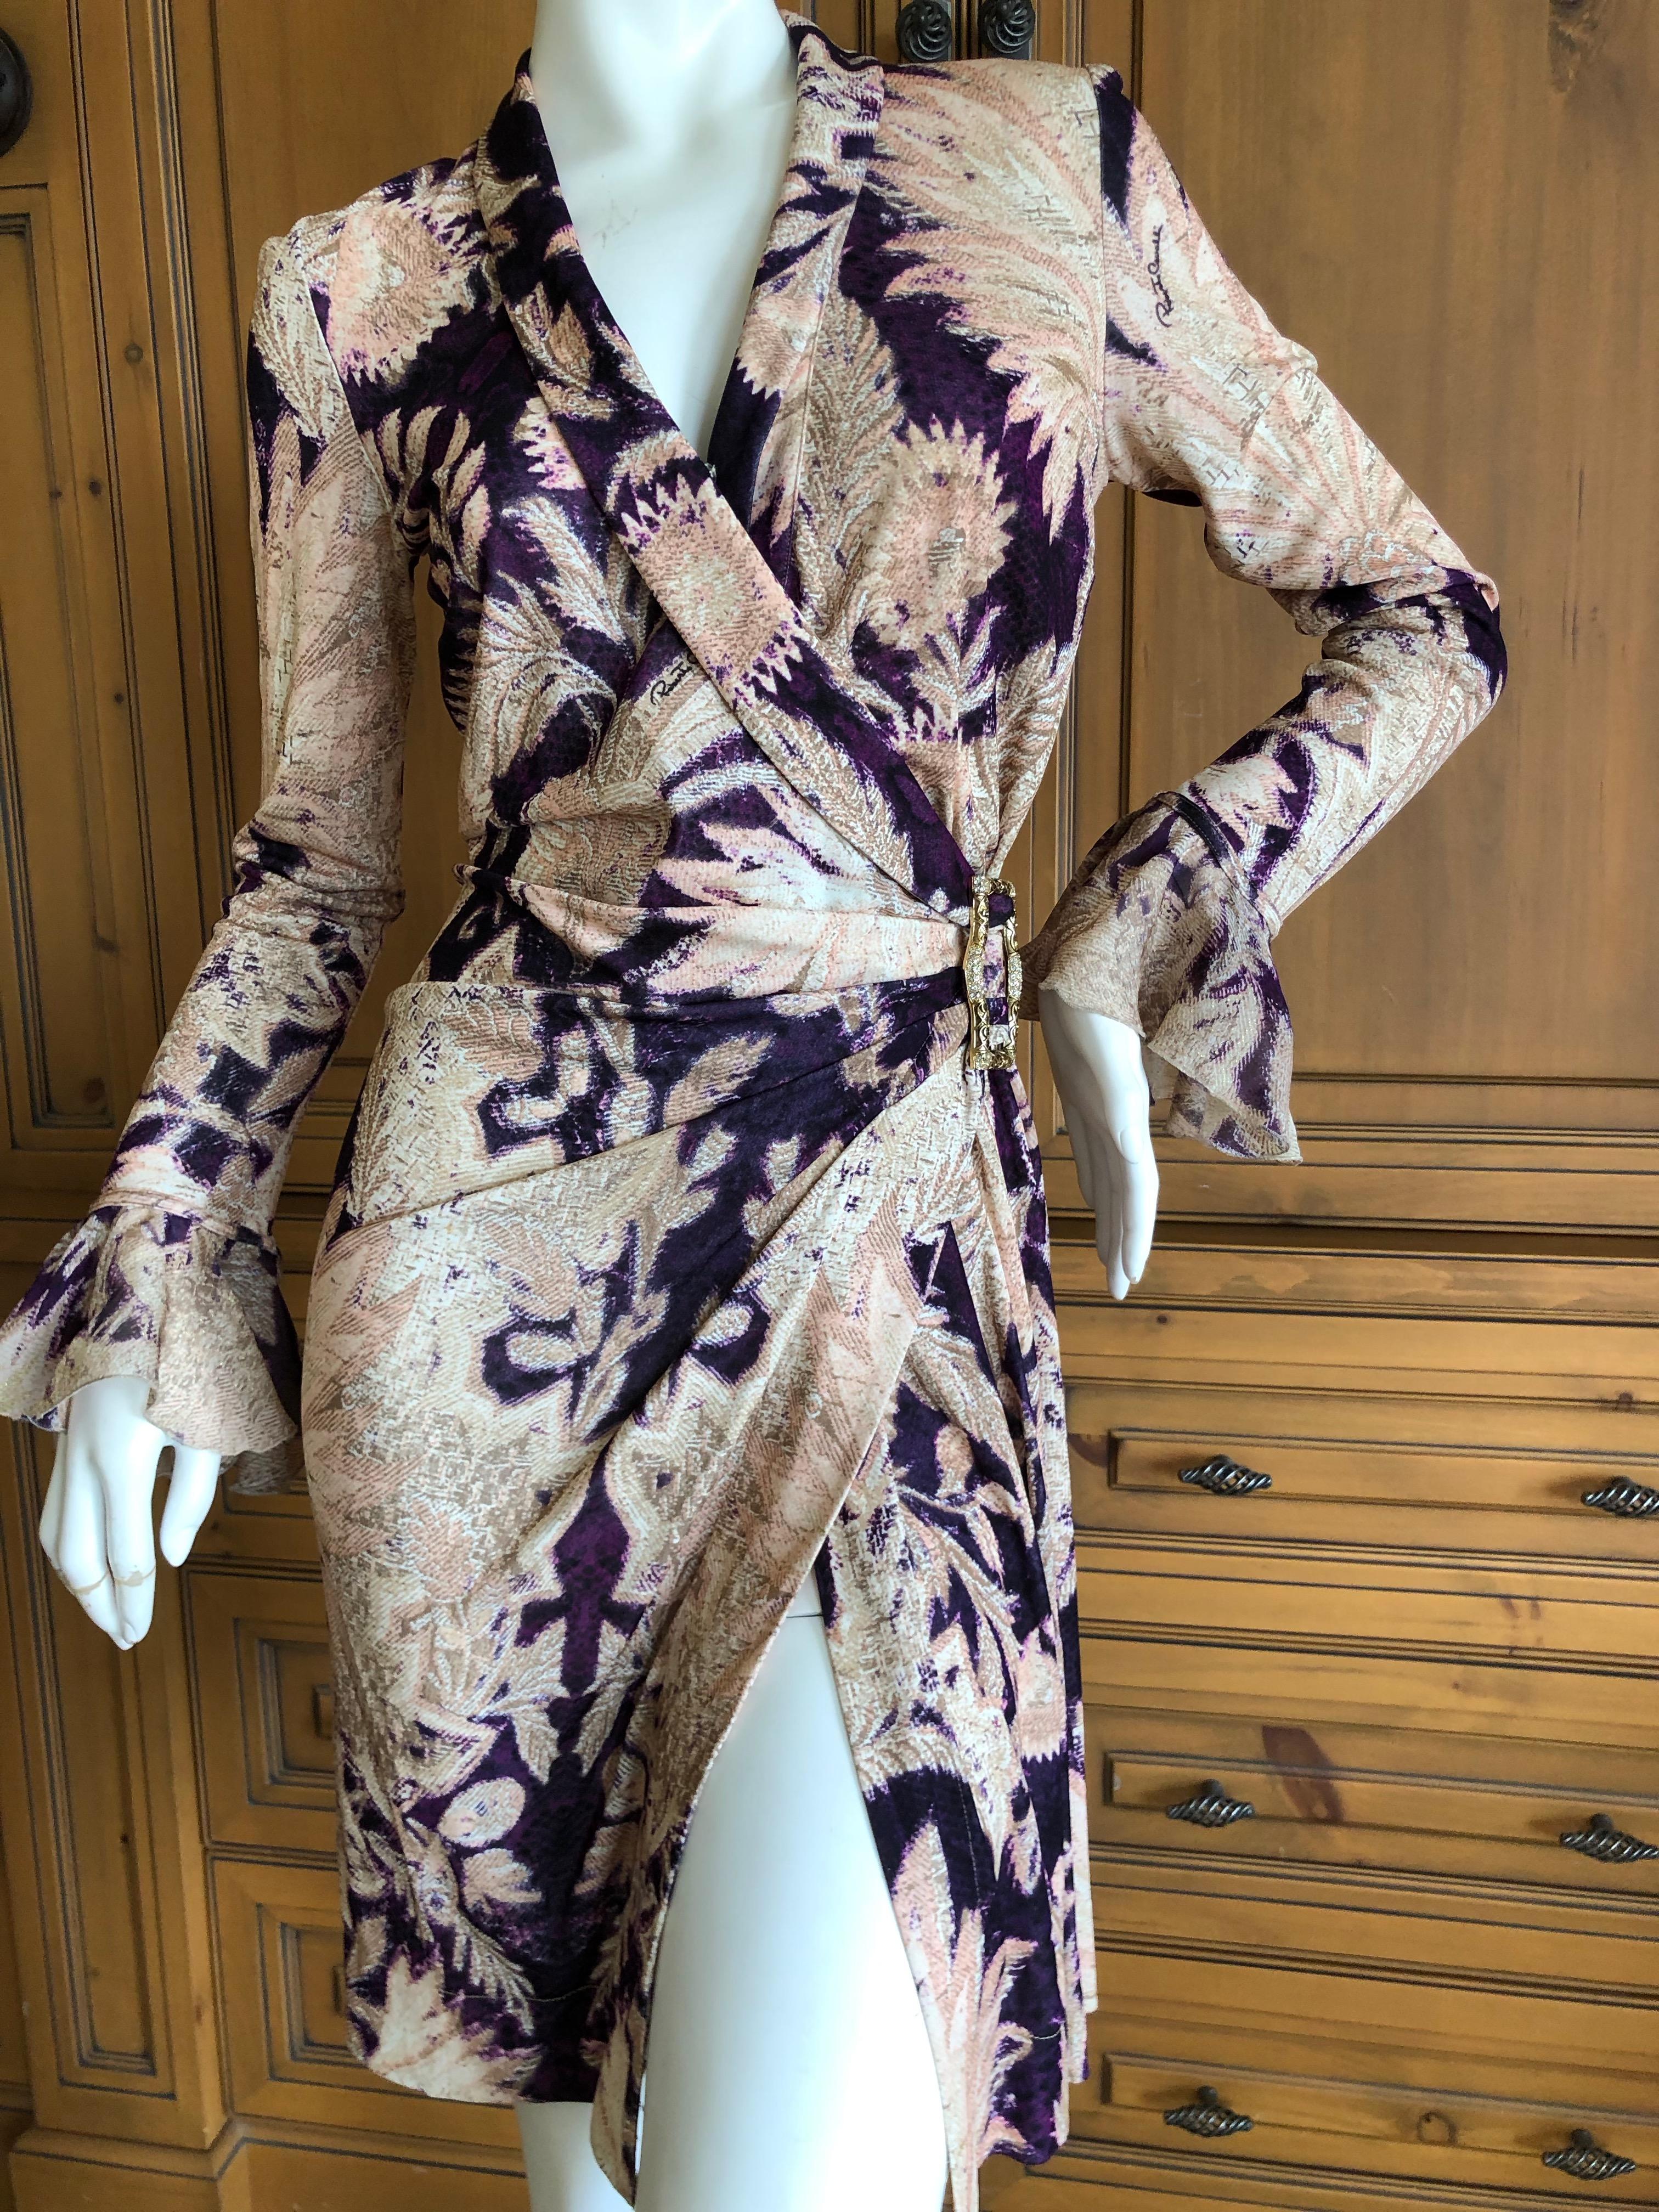 Roberto Cavalli Vintage Floral Print Cocktail Dress with Side Ornament
Size M, there is a lot of stretch.
This is so pretty.
Size 40
Bust 36